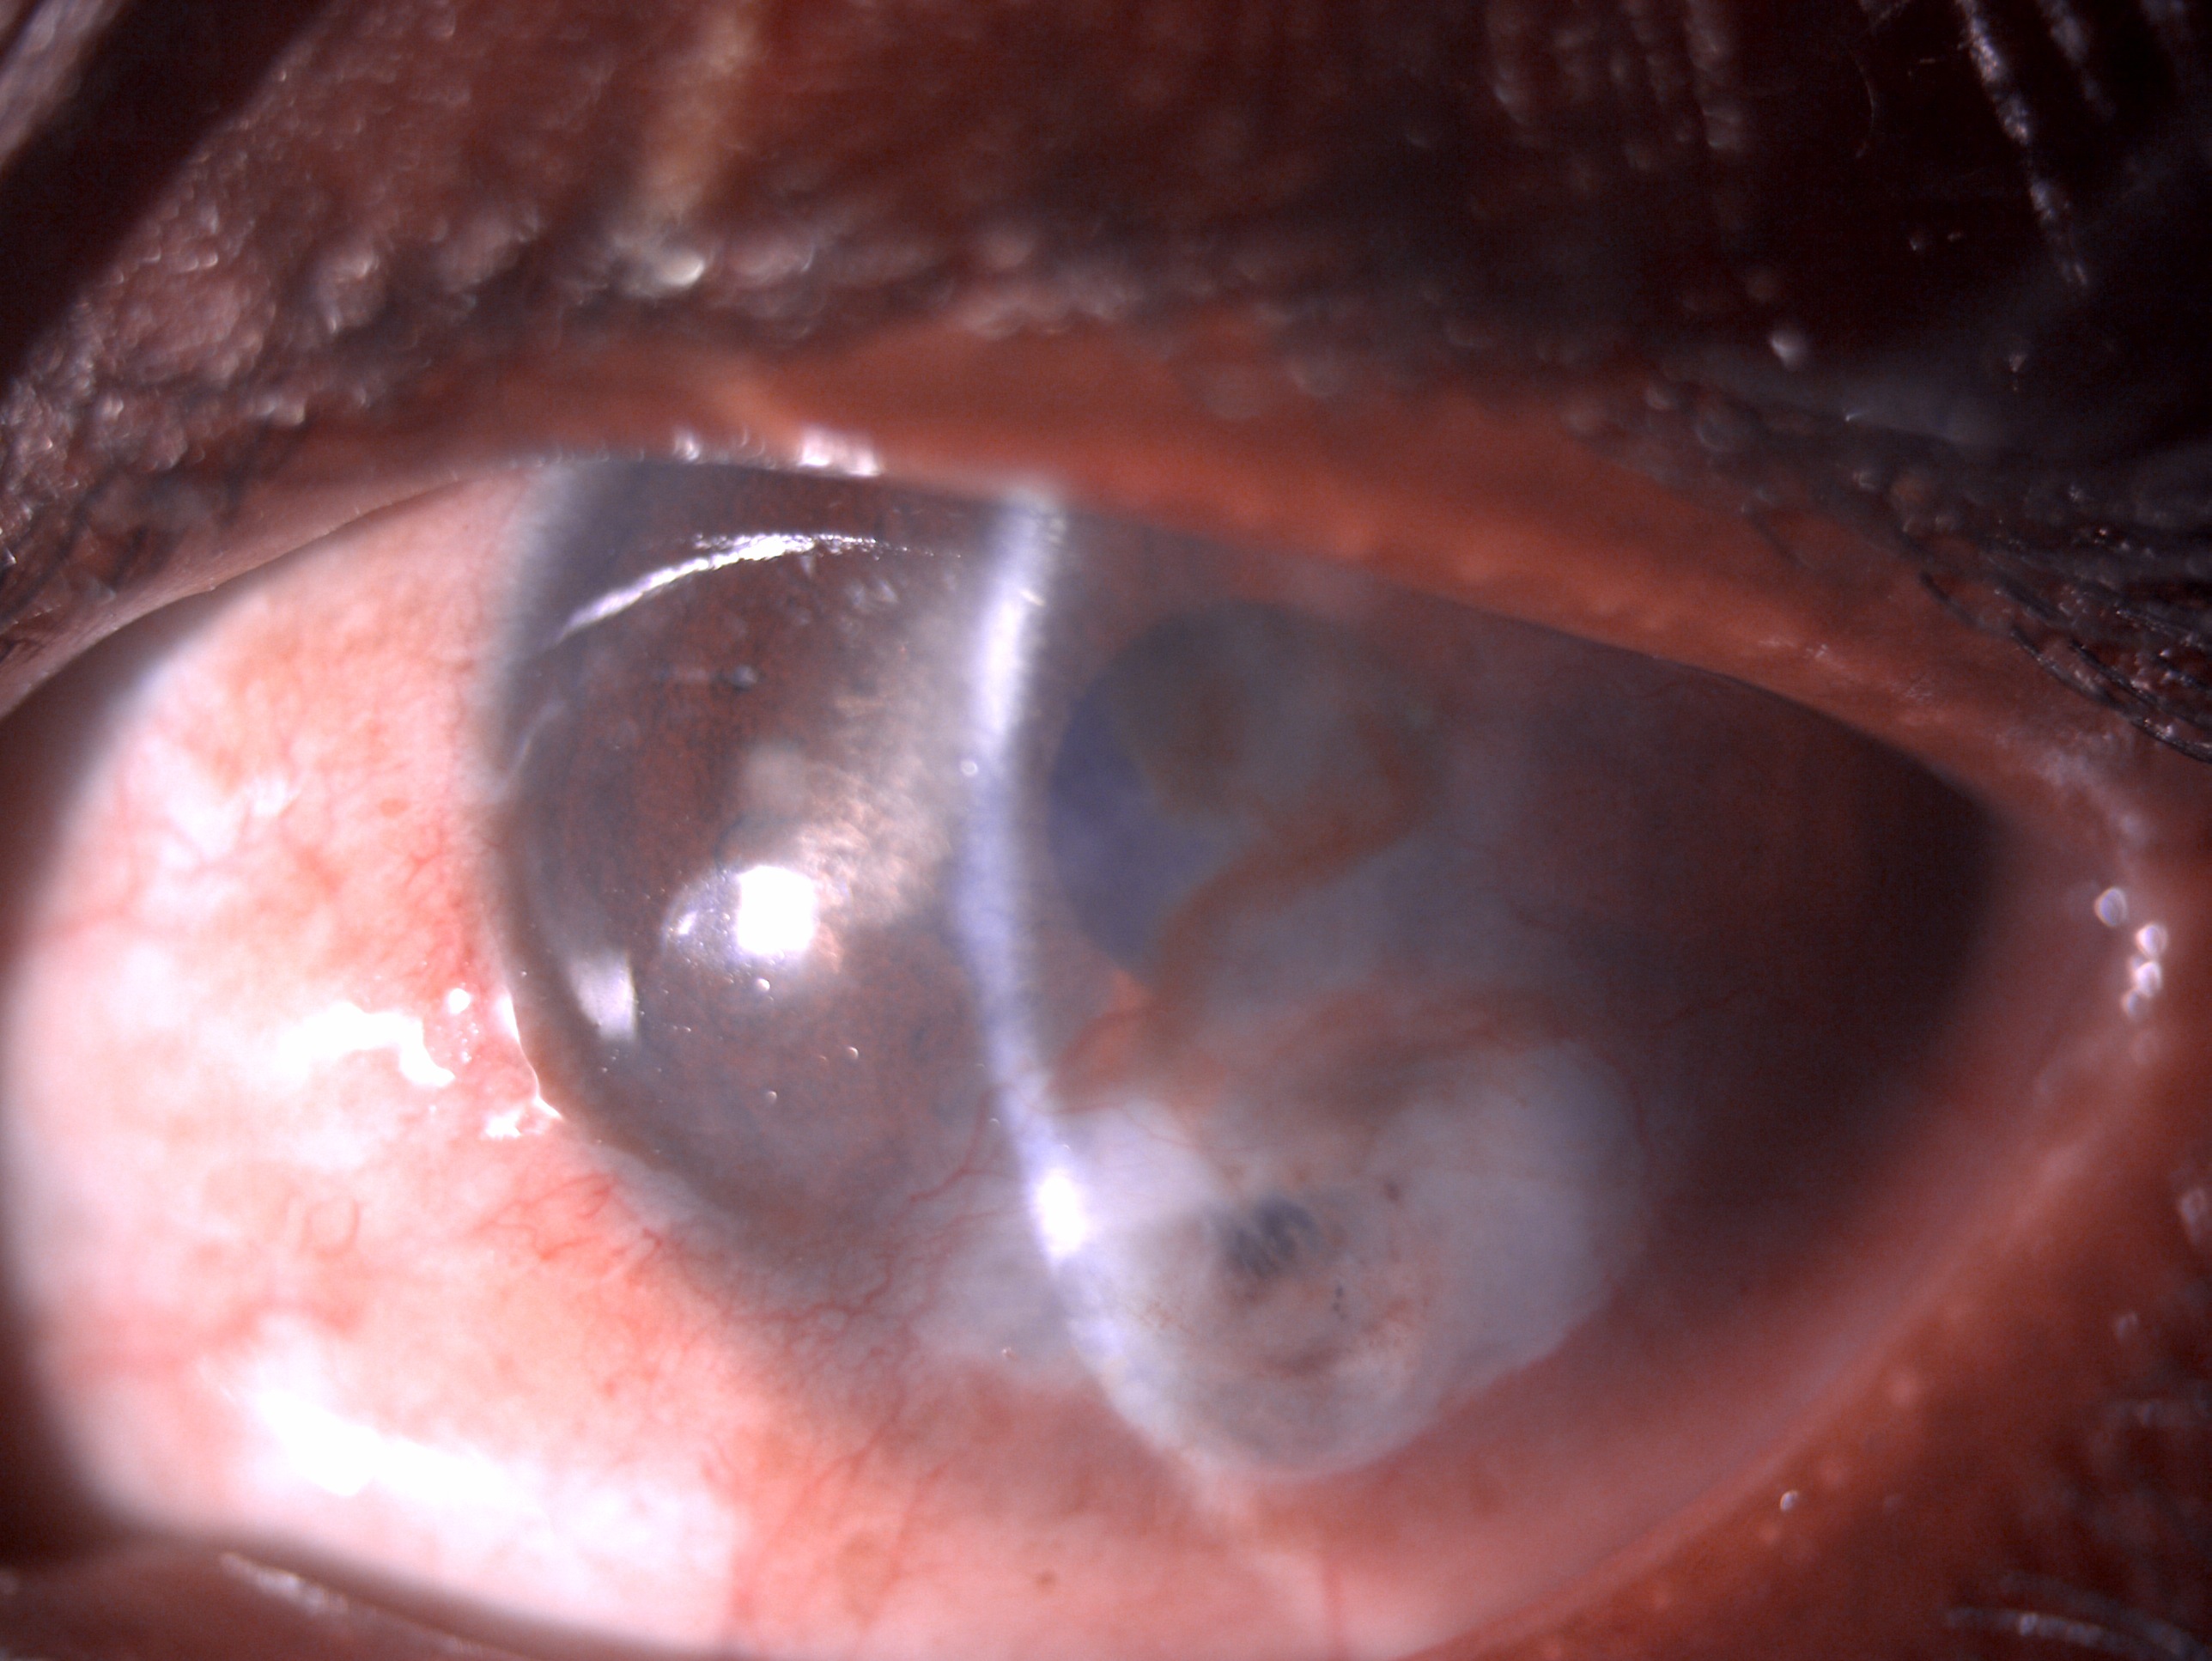 Slit image of the patient depicting conjunctival congestion, inferior localized epithelial bullae, superficial vascularizatio